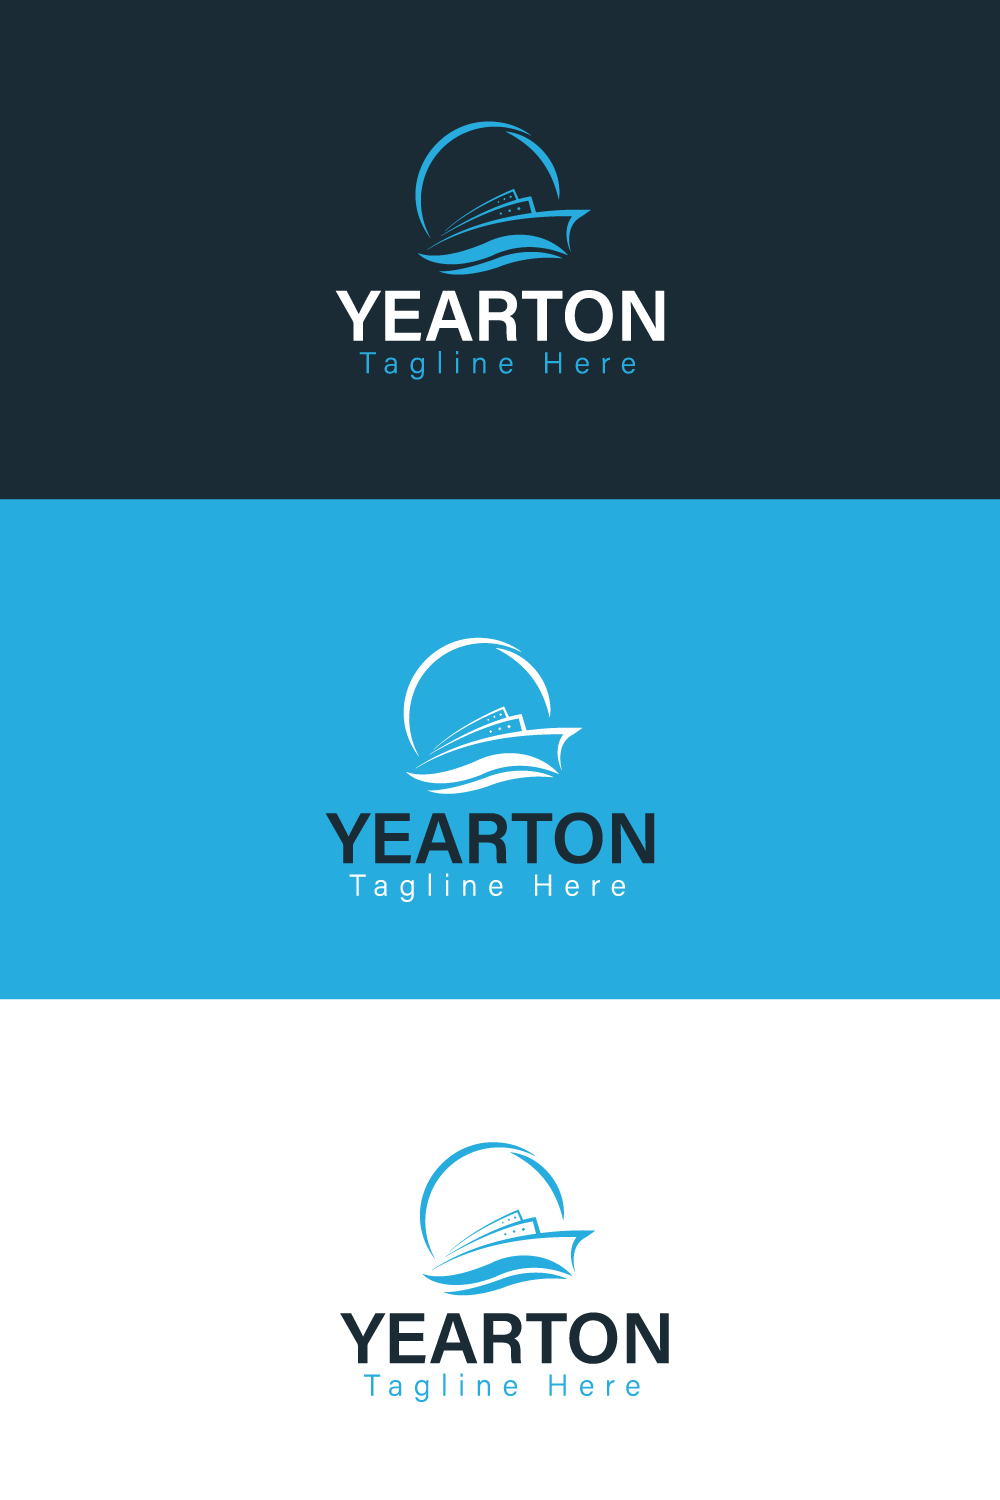 Yearton Boat Abstract Logo Template Pinterest image.